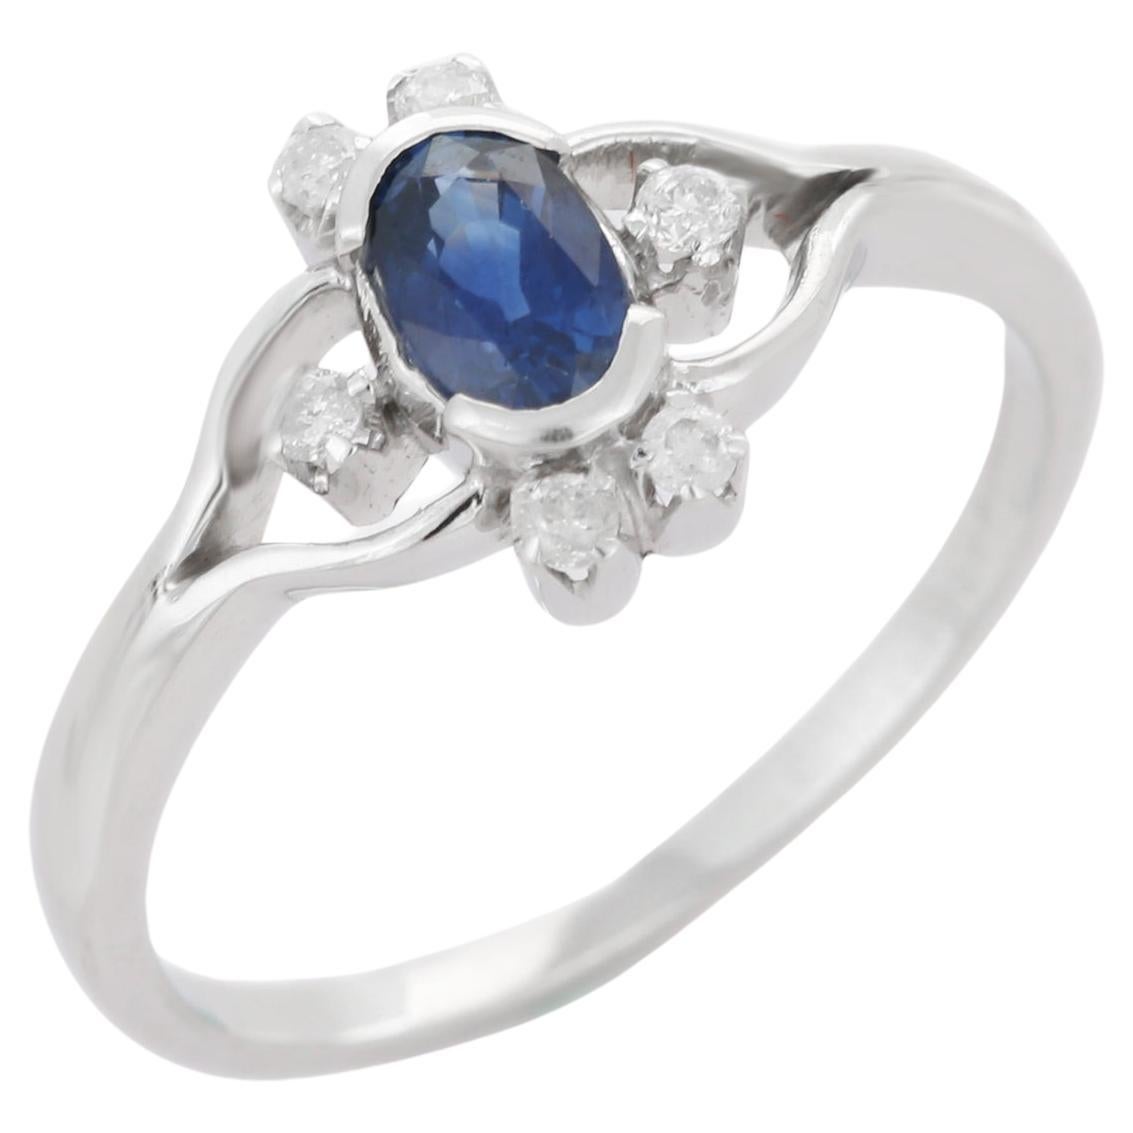 Solid 18k White Gold Vivid Oval Blue Sapphire and Diamond Wedding Ring